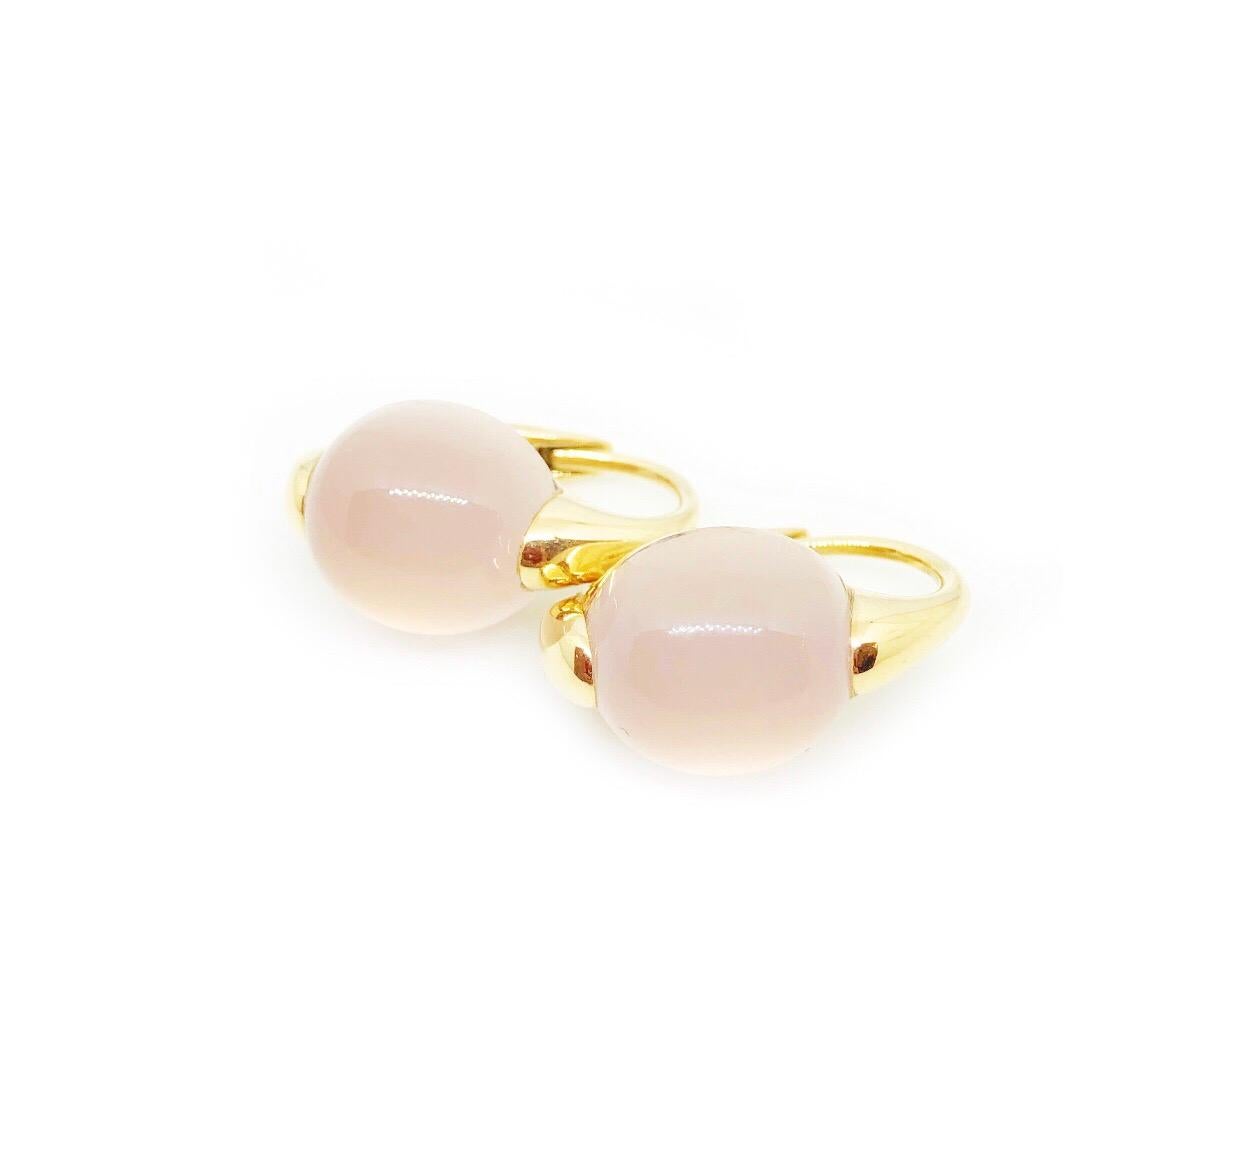 The pearly allure of its opalescent colours and soft curves, makes Luna reminiscent of the moon.
EARRINGS IN ROSE GOLD WITH MILKY PINK QUARTZ
Perfect Condition Box Included. 